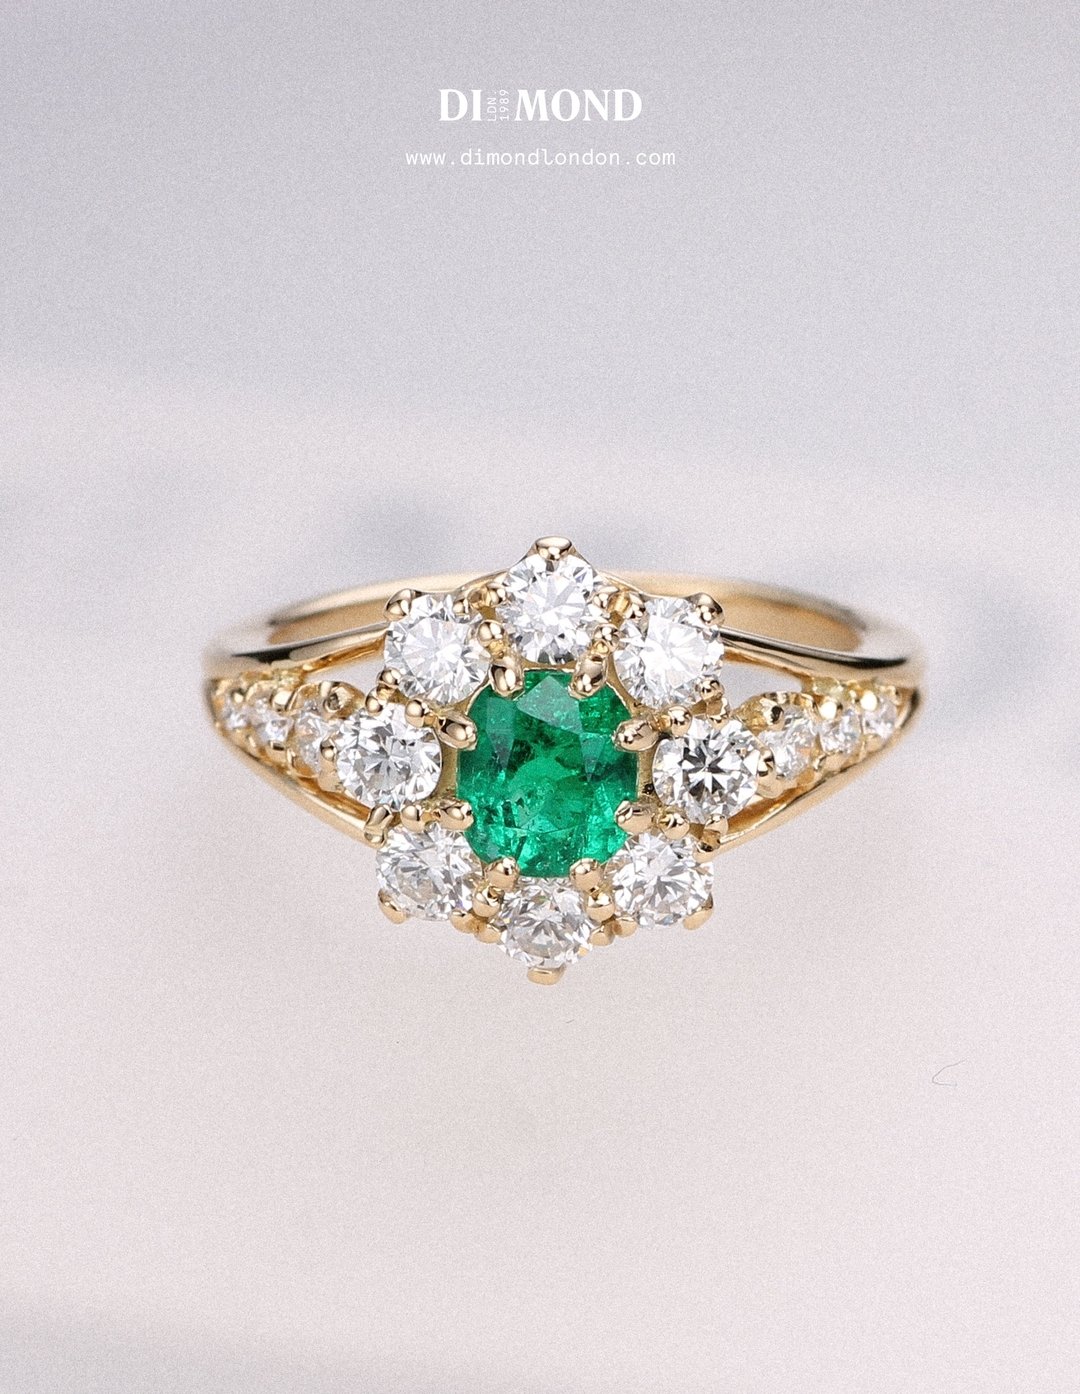 This Colombian emerald daisy-style ring has a vintage feel but with the high quality craftsmanship of a modern piece. Its split shank, decorated with small graduated round stones, reflects the classic style of vintage designs. 💚

The exceptional col